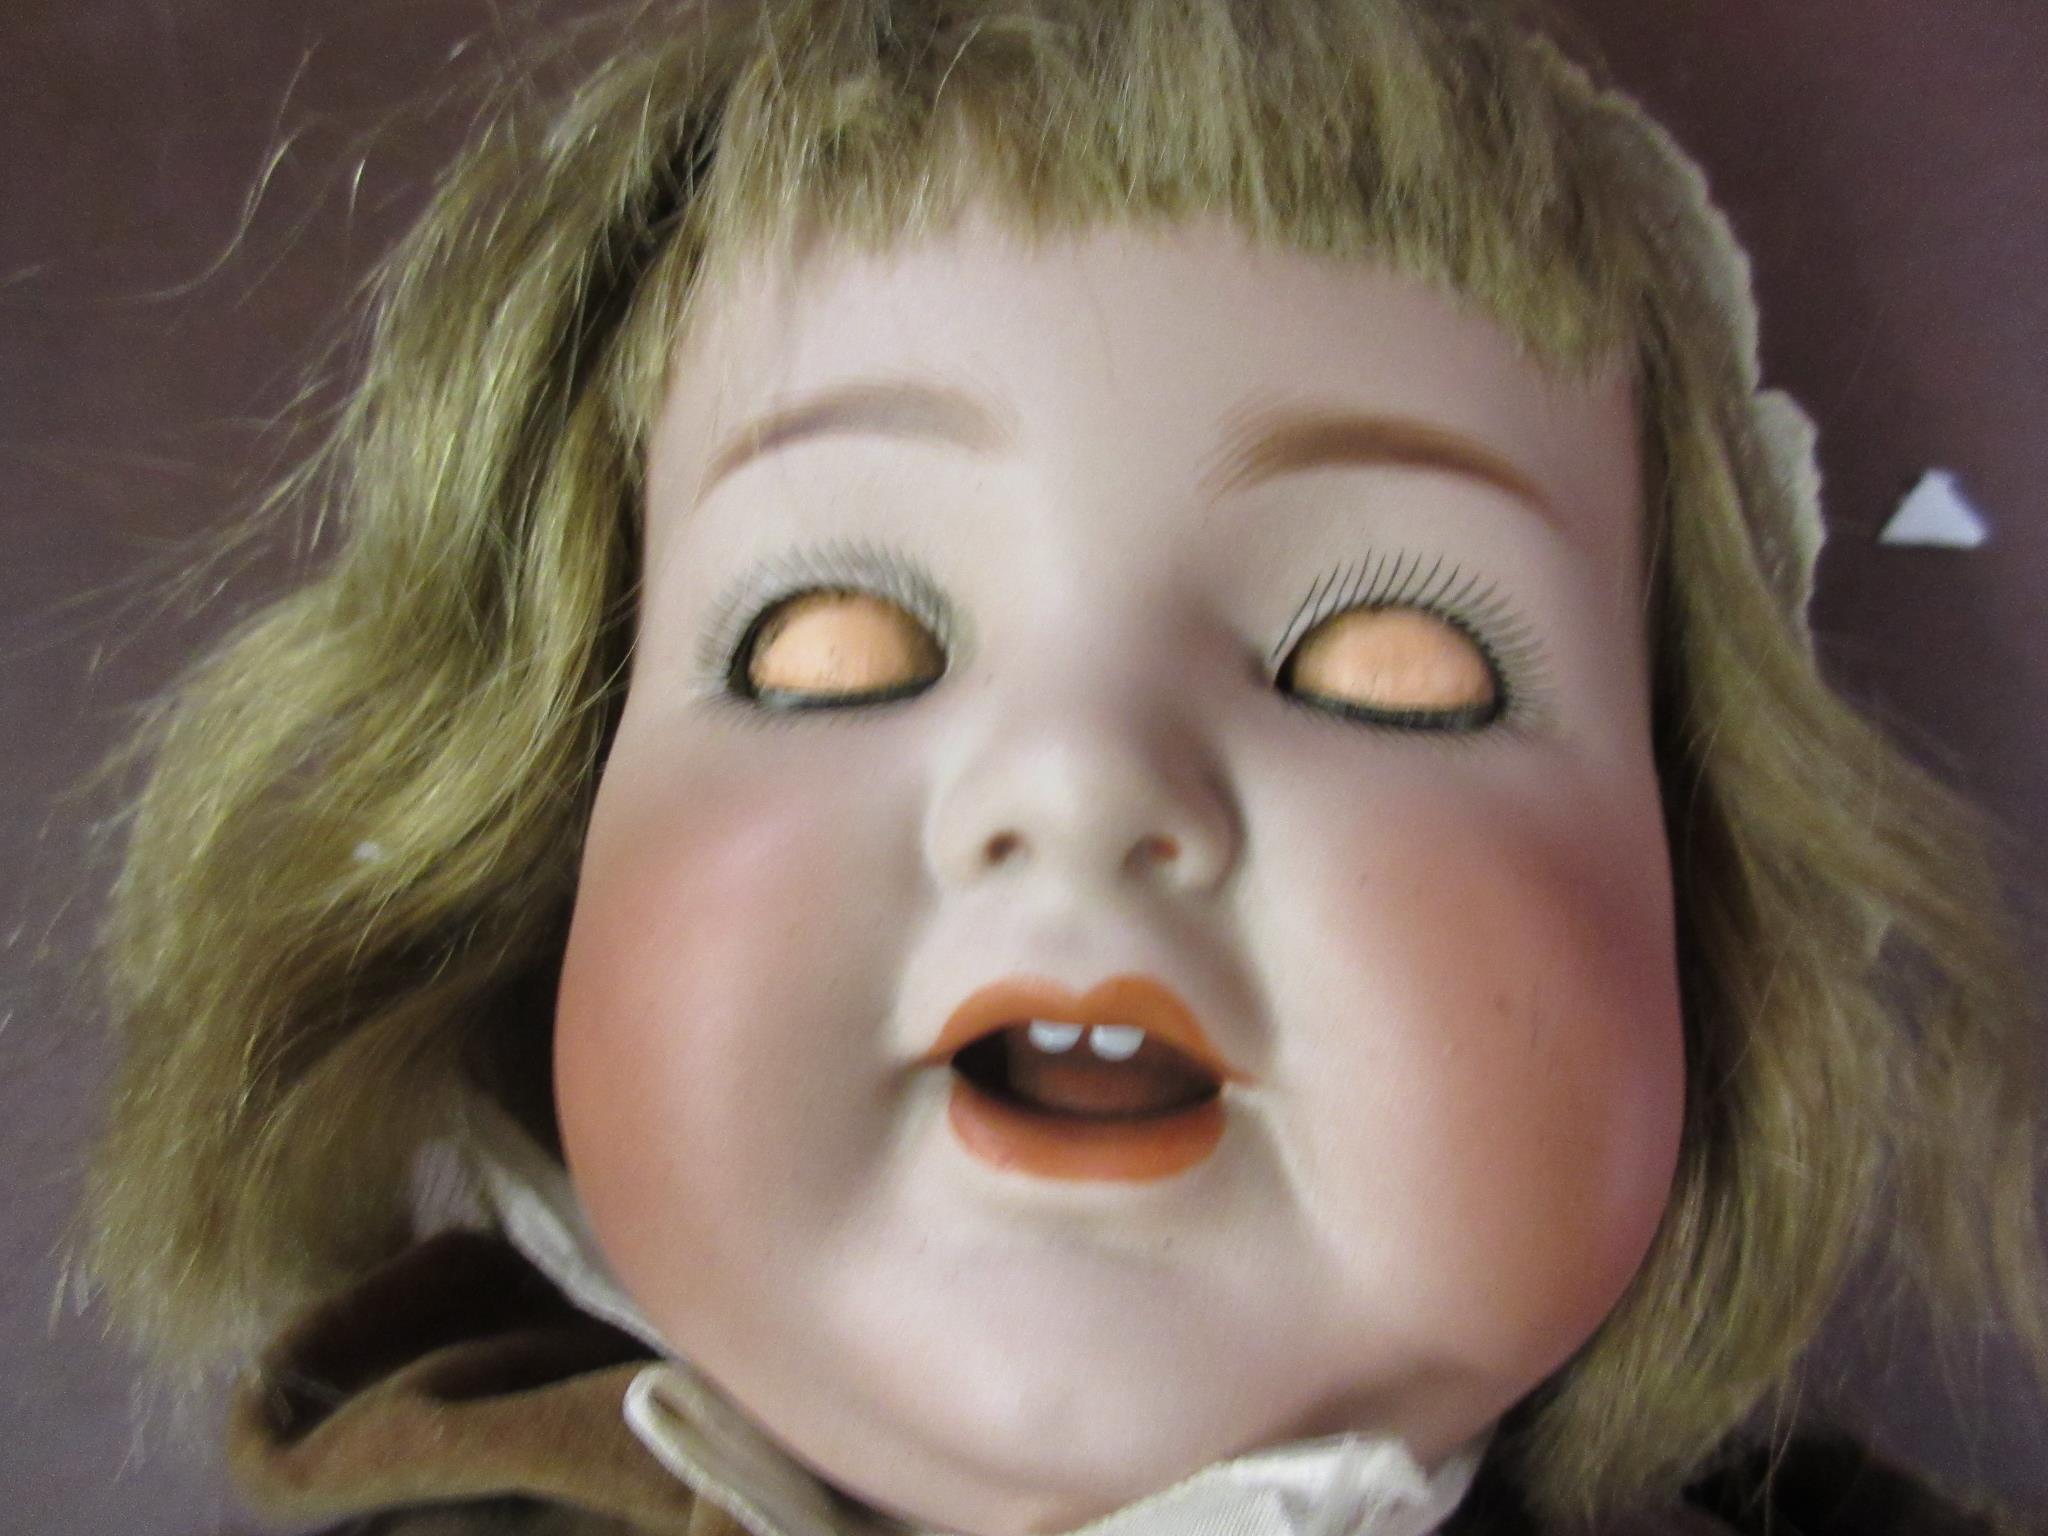 Simon & Halbig, German bisque headed doll with sleeping eyes, open mouth and two teeth on a - Image 5 of 5